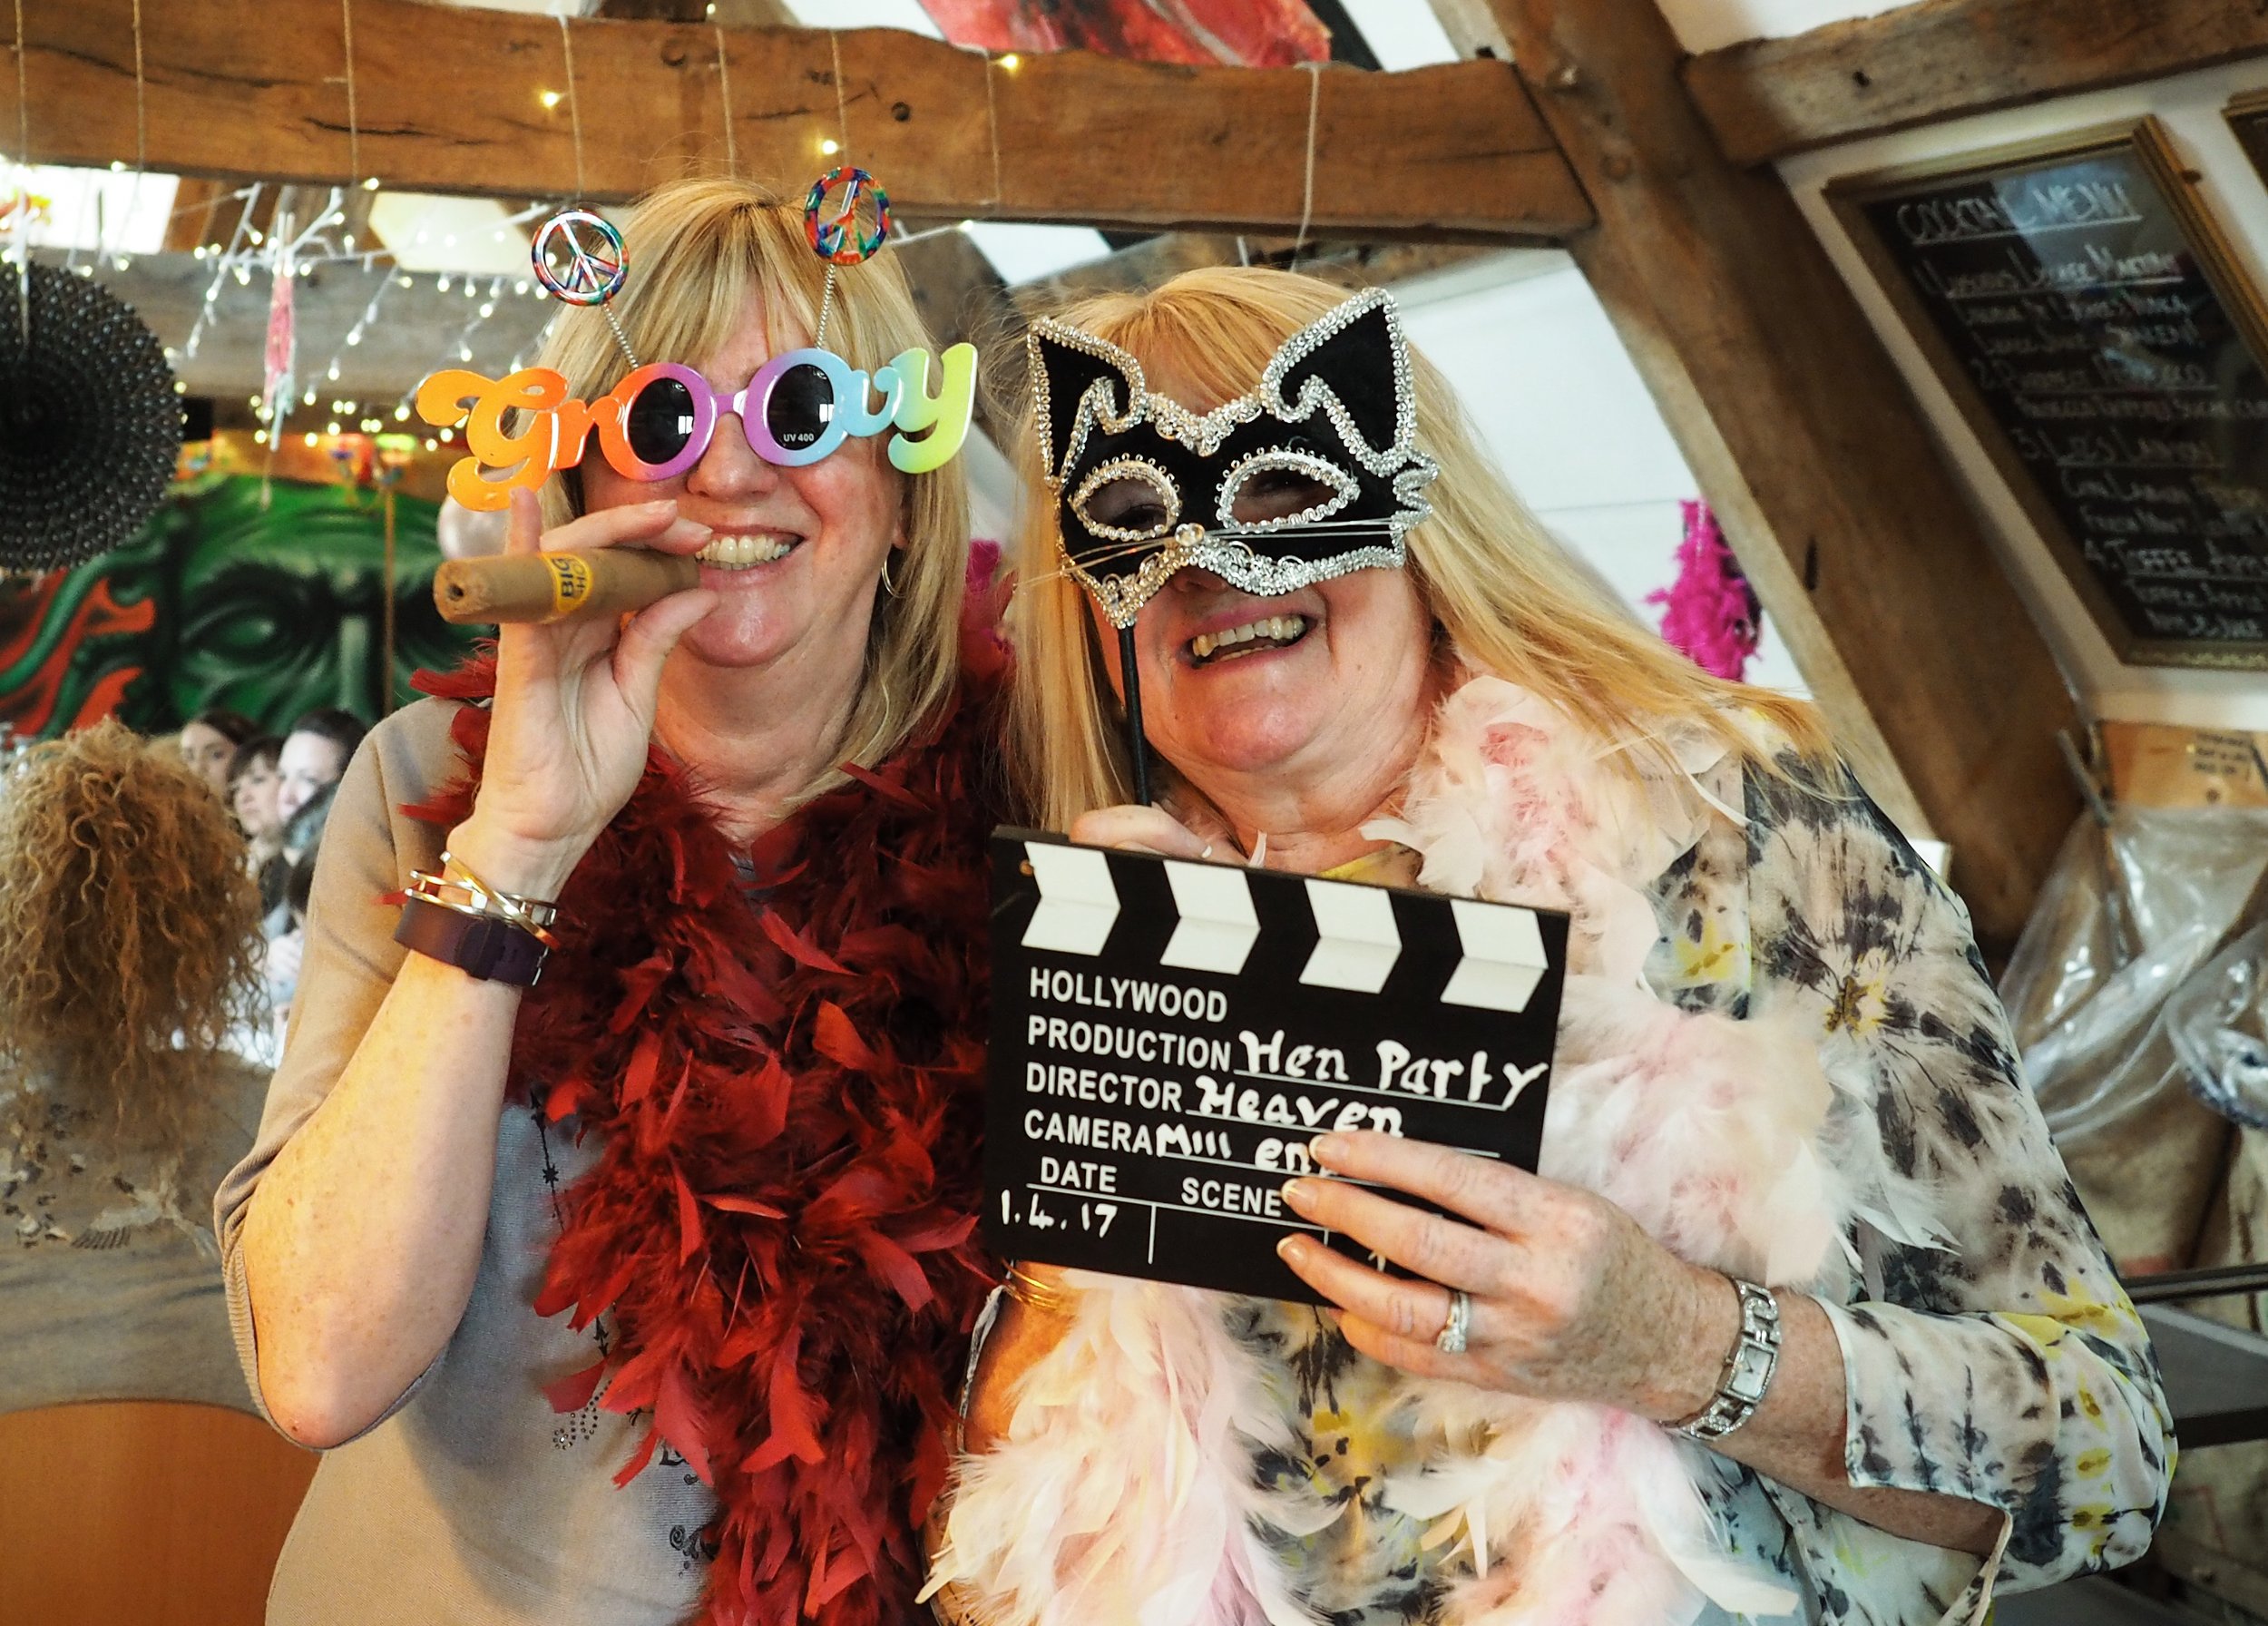 photo booth hen party weekend